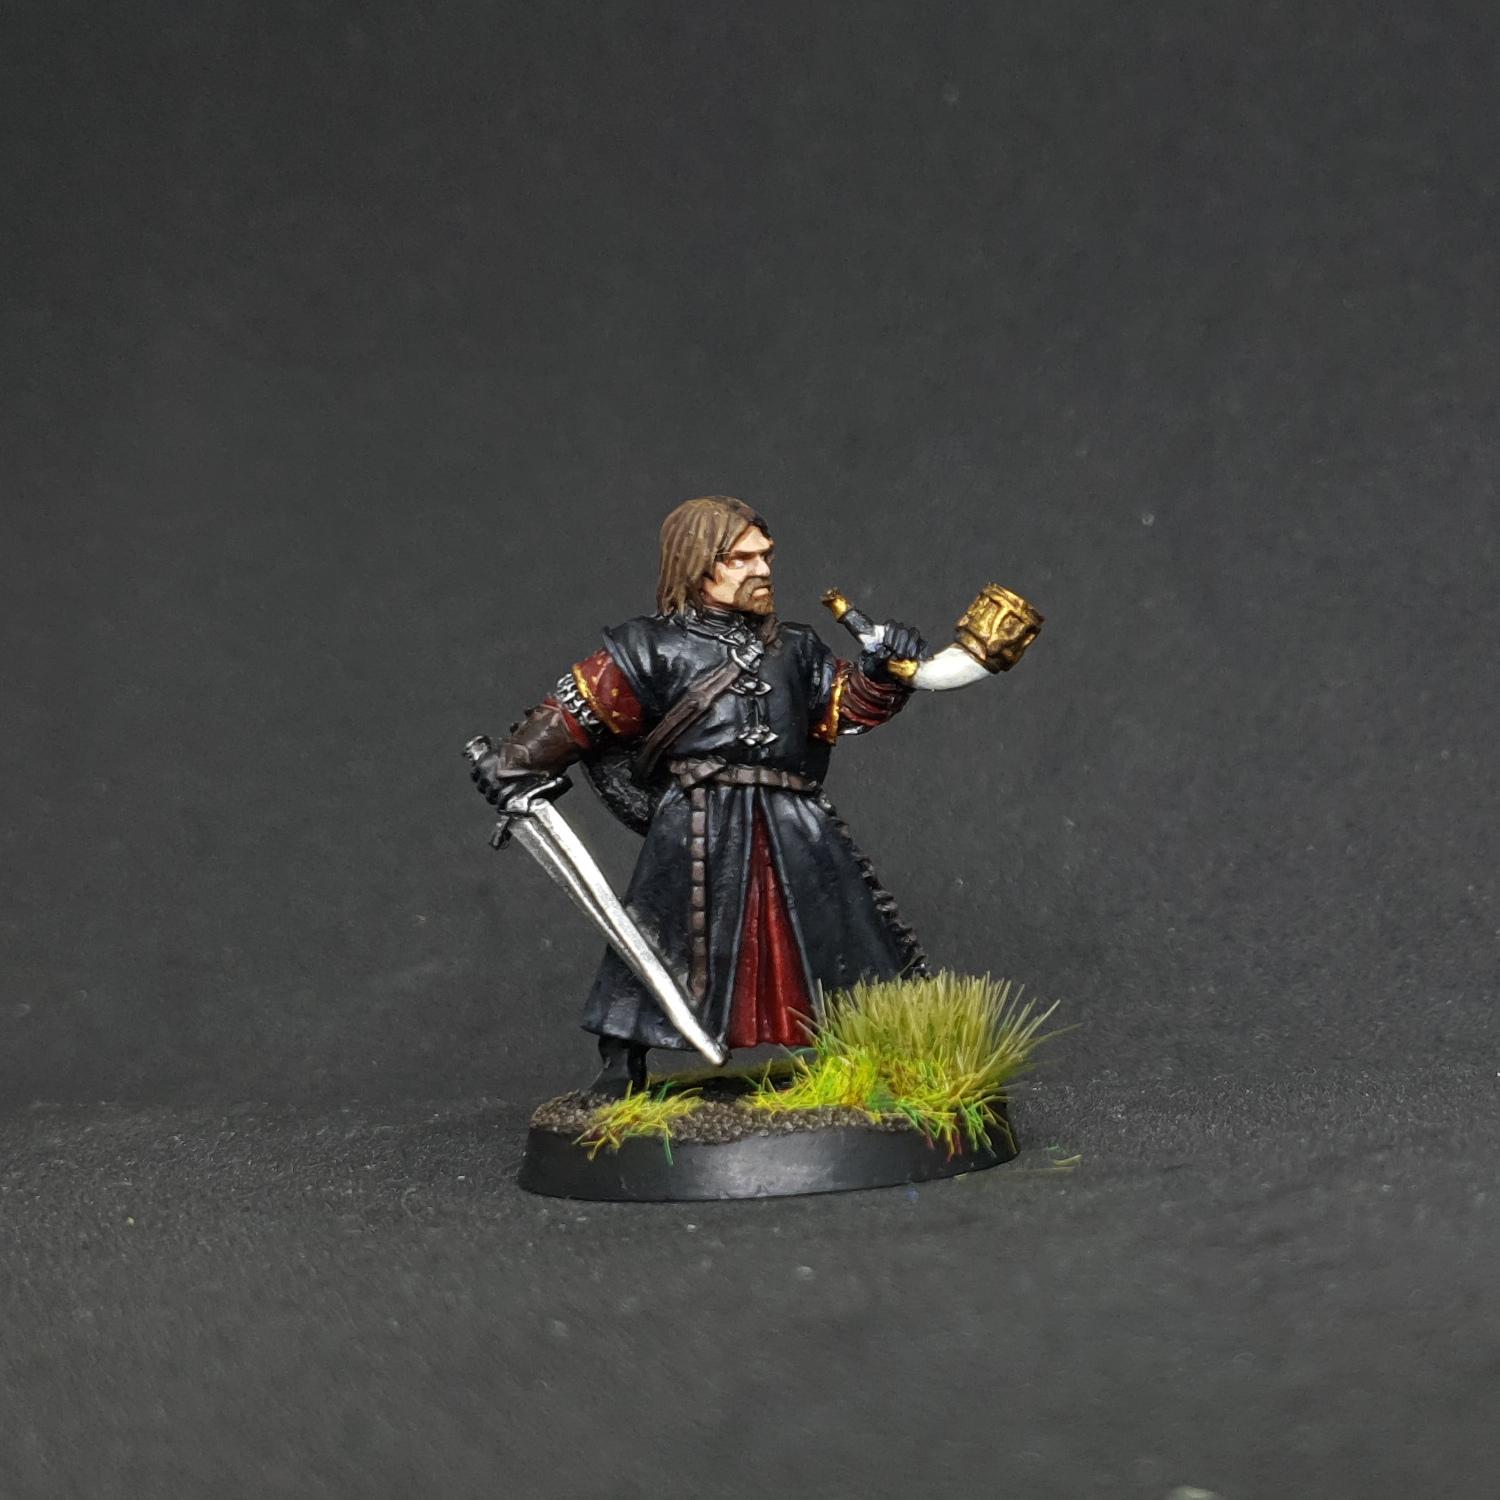 Battle, Boromir, Earth, Fellowship, Game, Lord, Middle, Of, Rings, Strategy, The